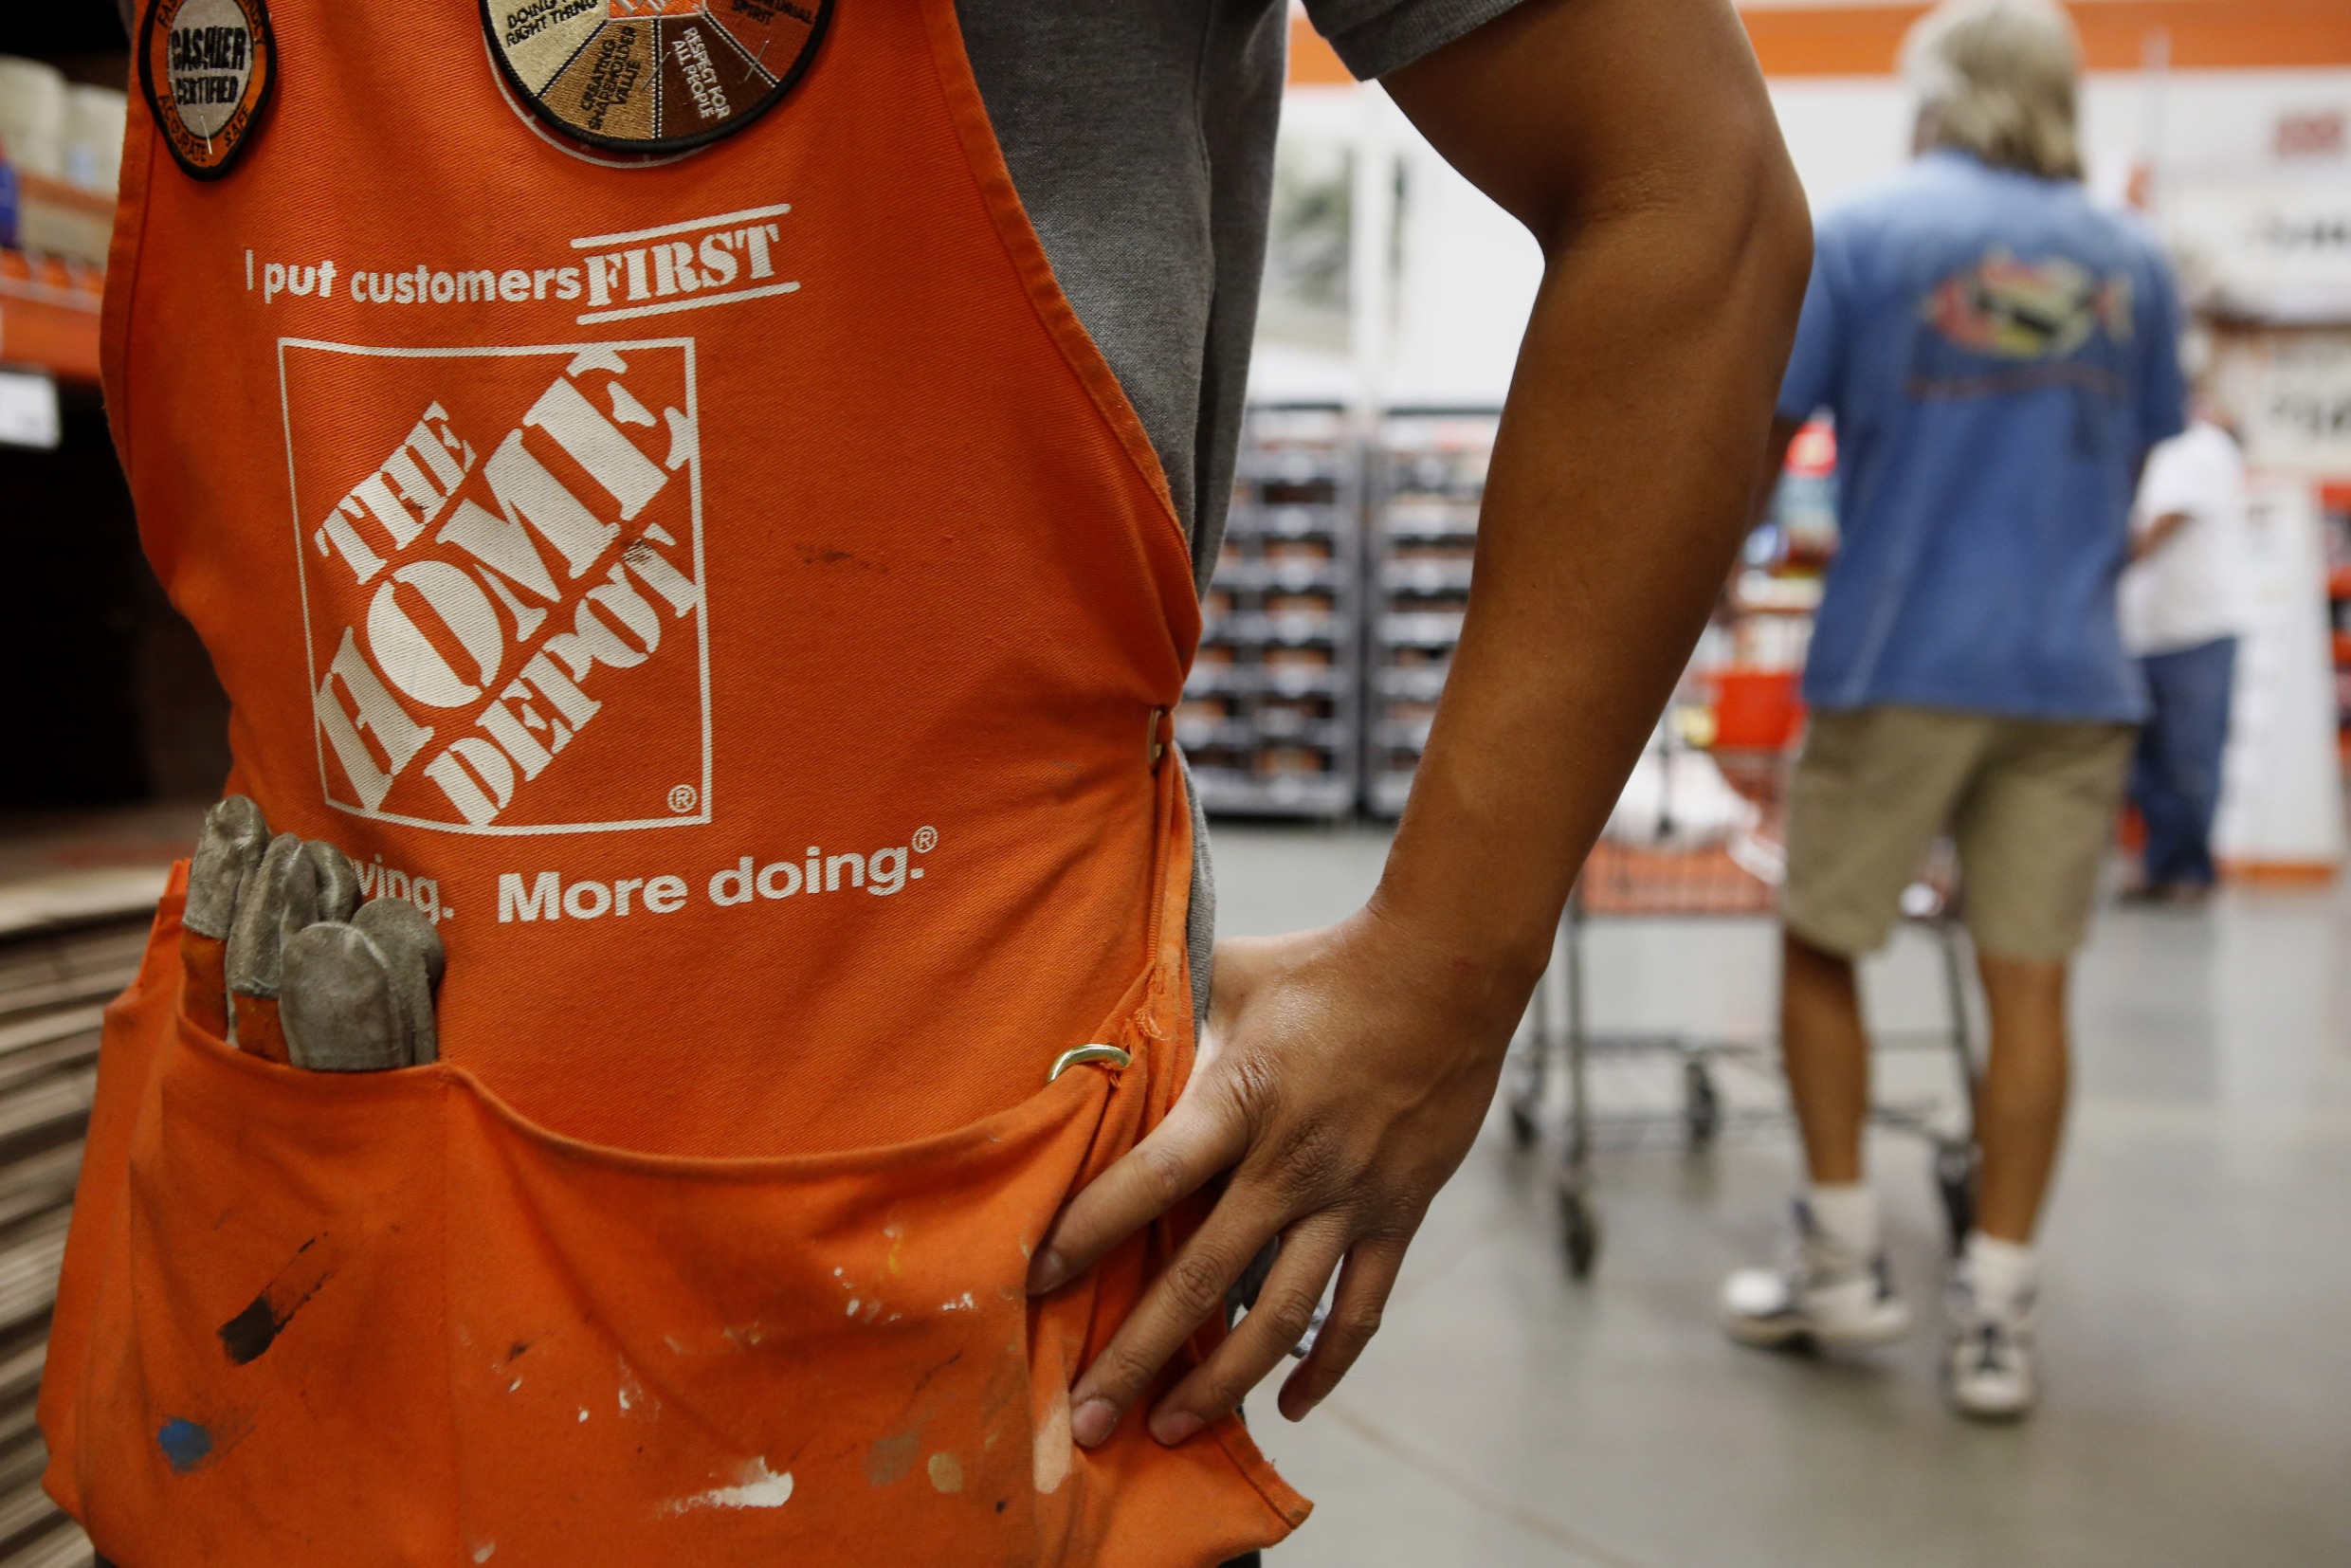 Home Depot workers in Philadelphia vote on whether to unionize : NPR